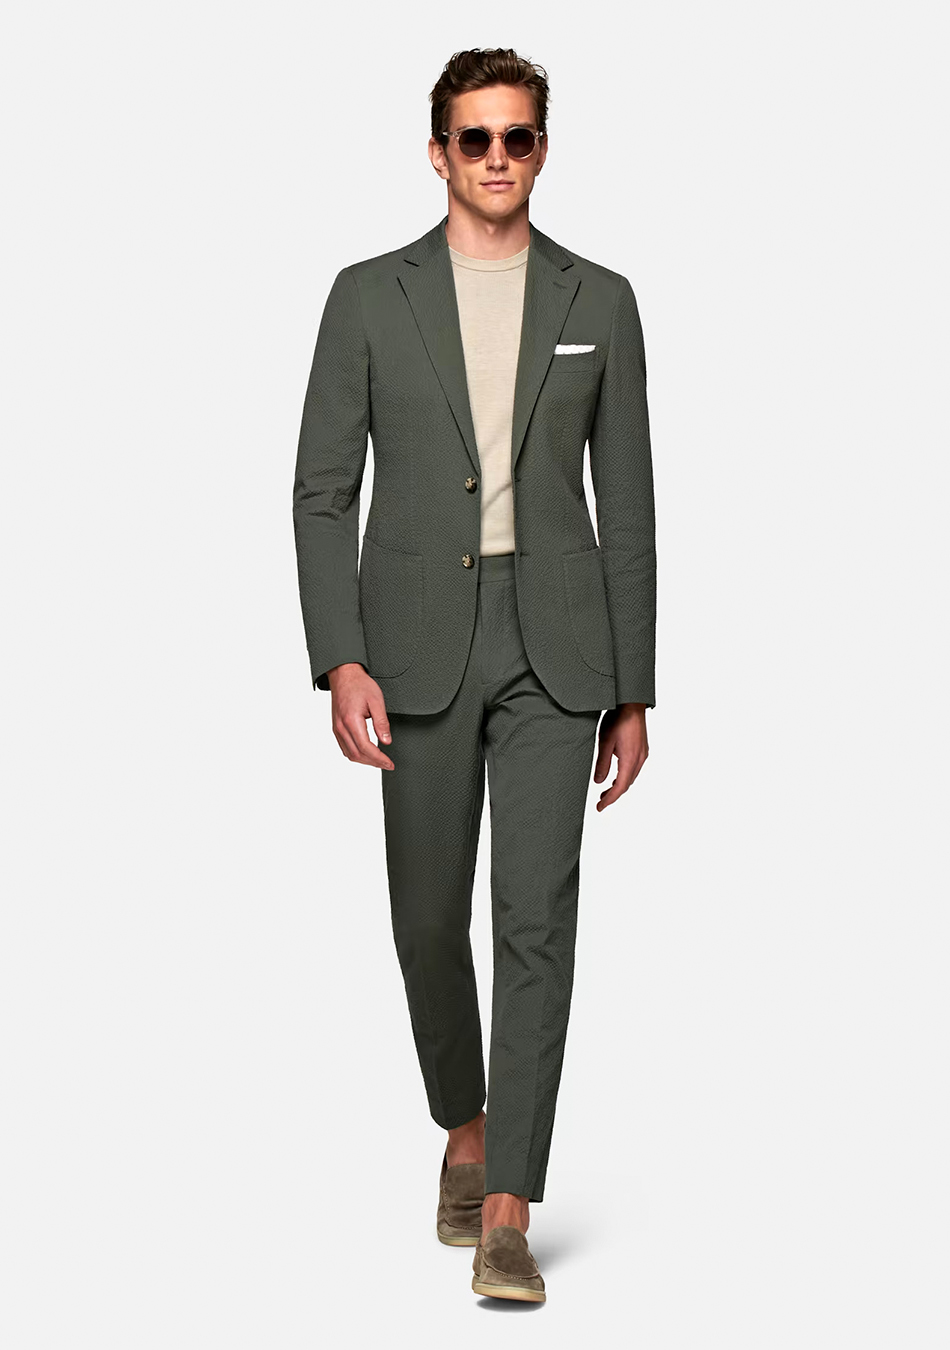 Olive green suit, beige t-shirt, and brown loafers